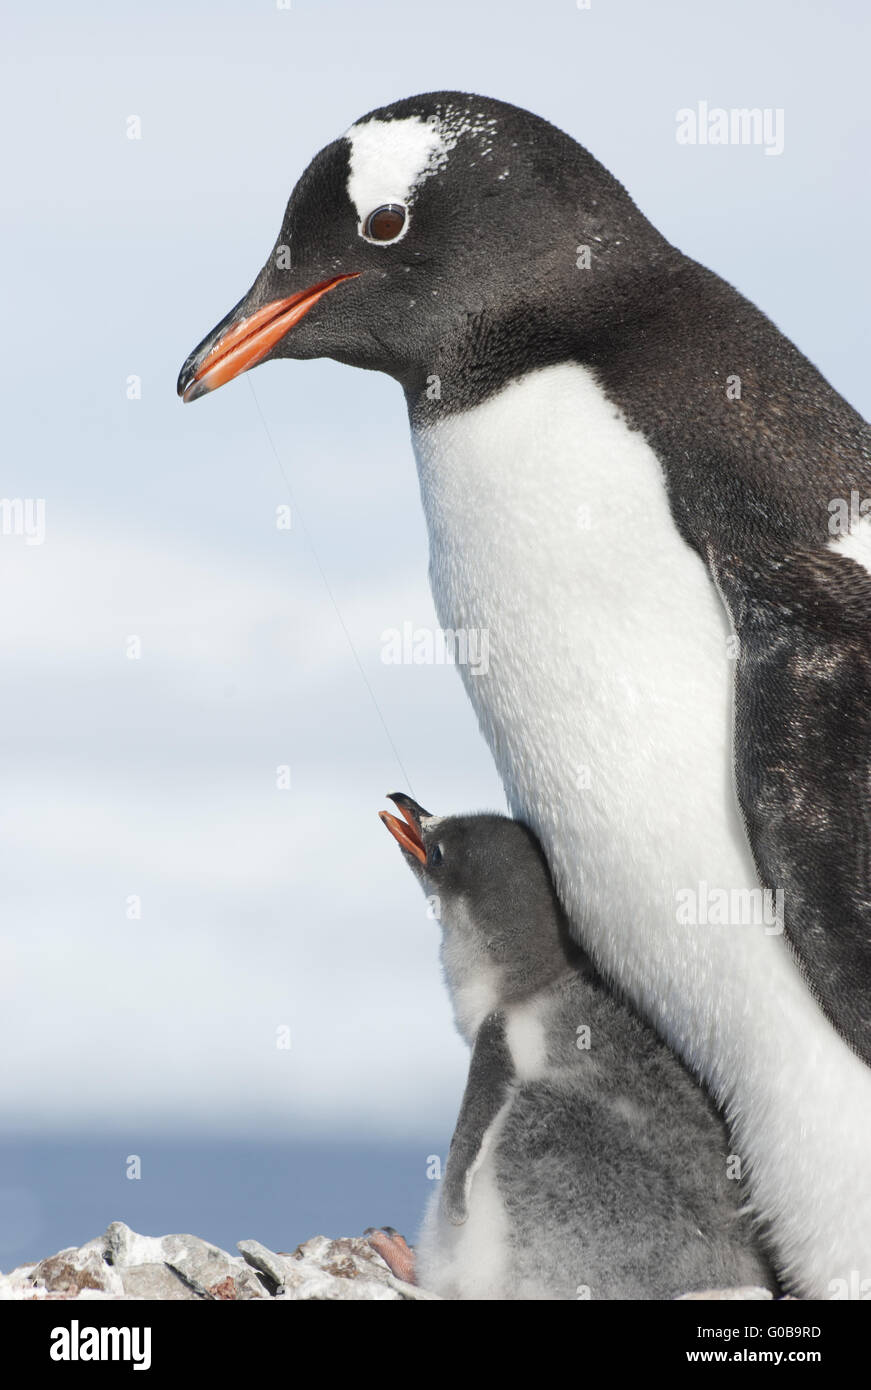 Gentoo penguin adult and chick Stock Photo